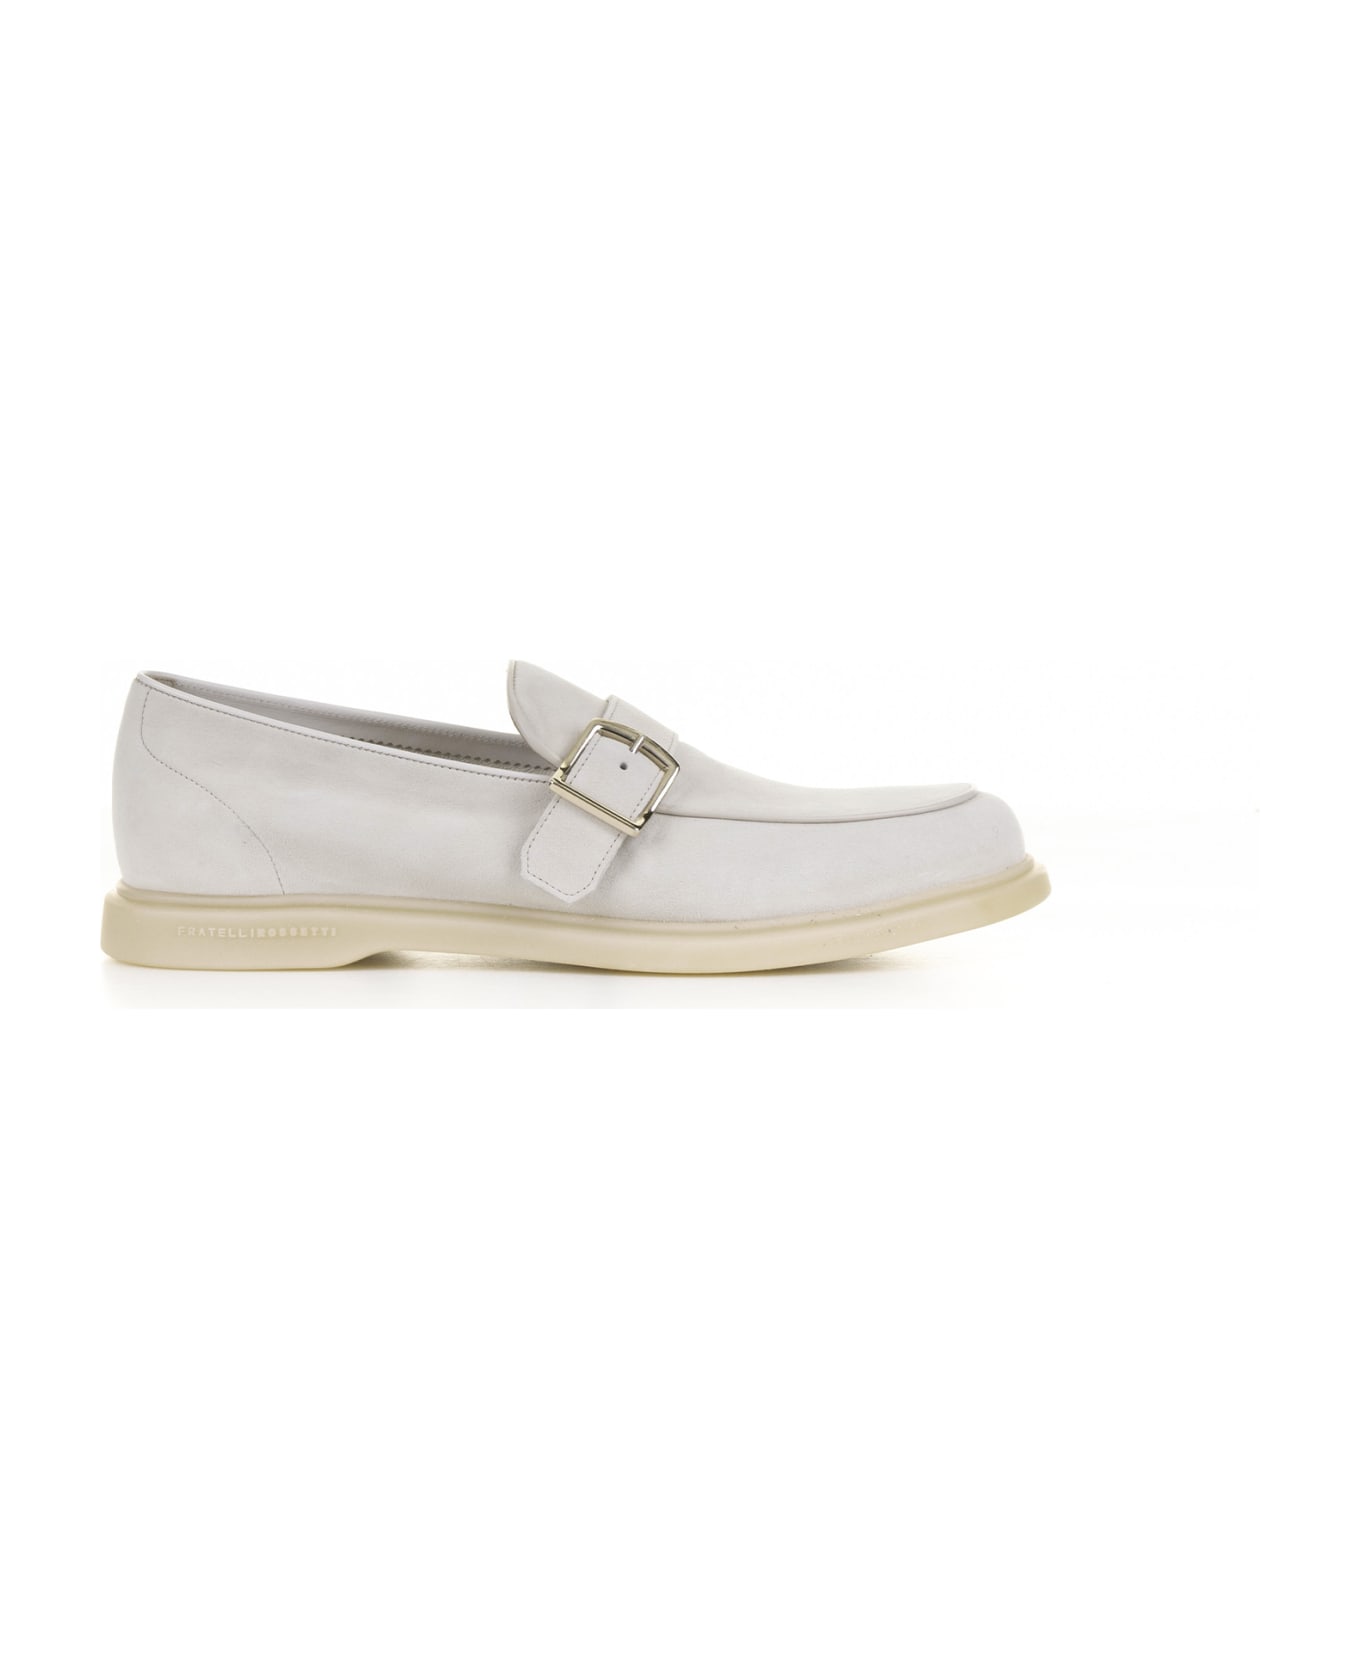 Fratelli Rossetti Ivory Suede Moccasin - AVORIO